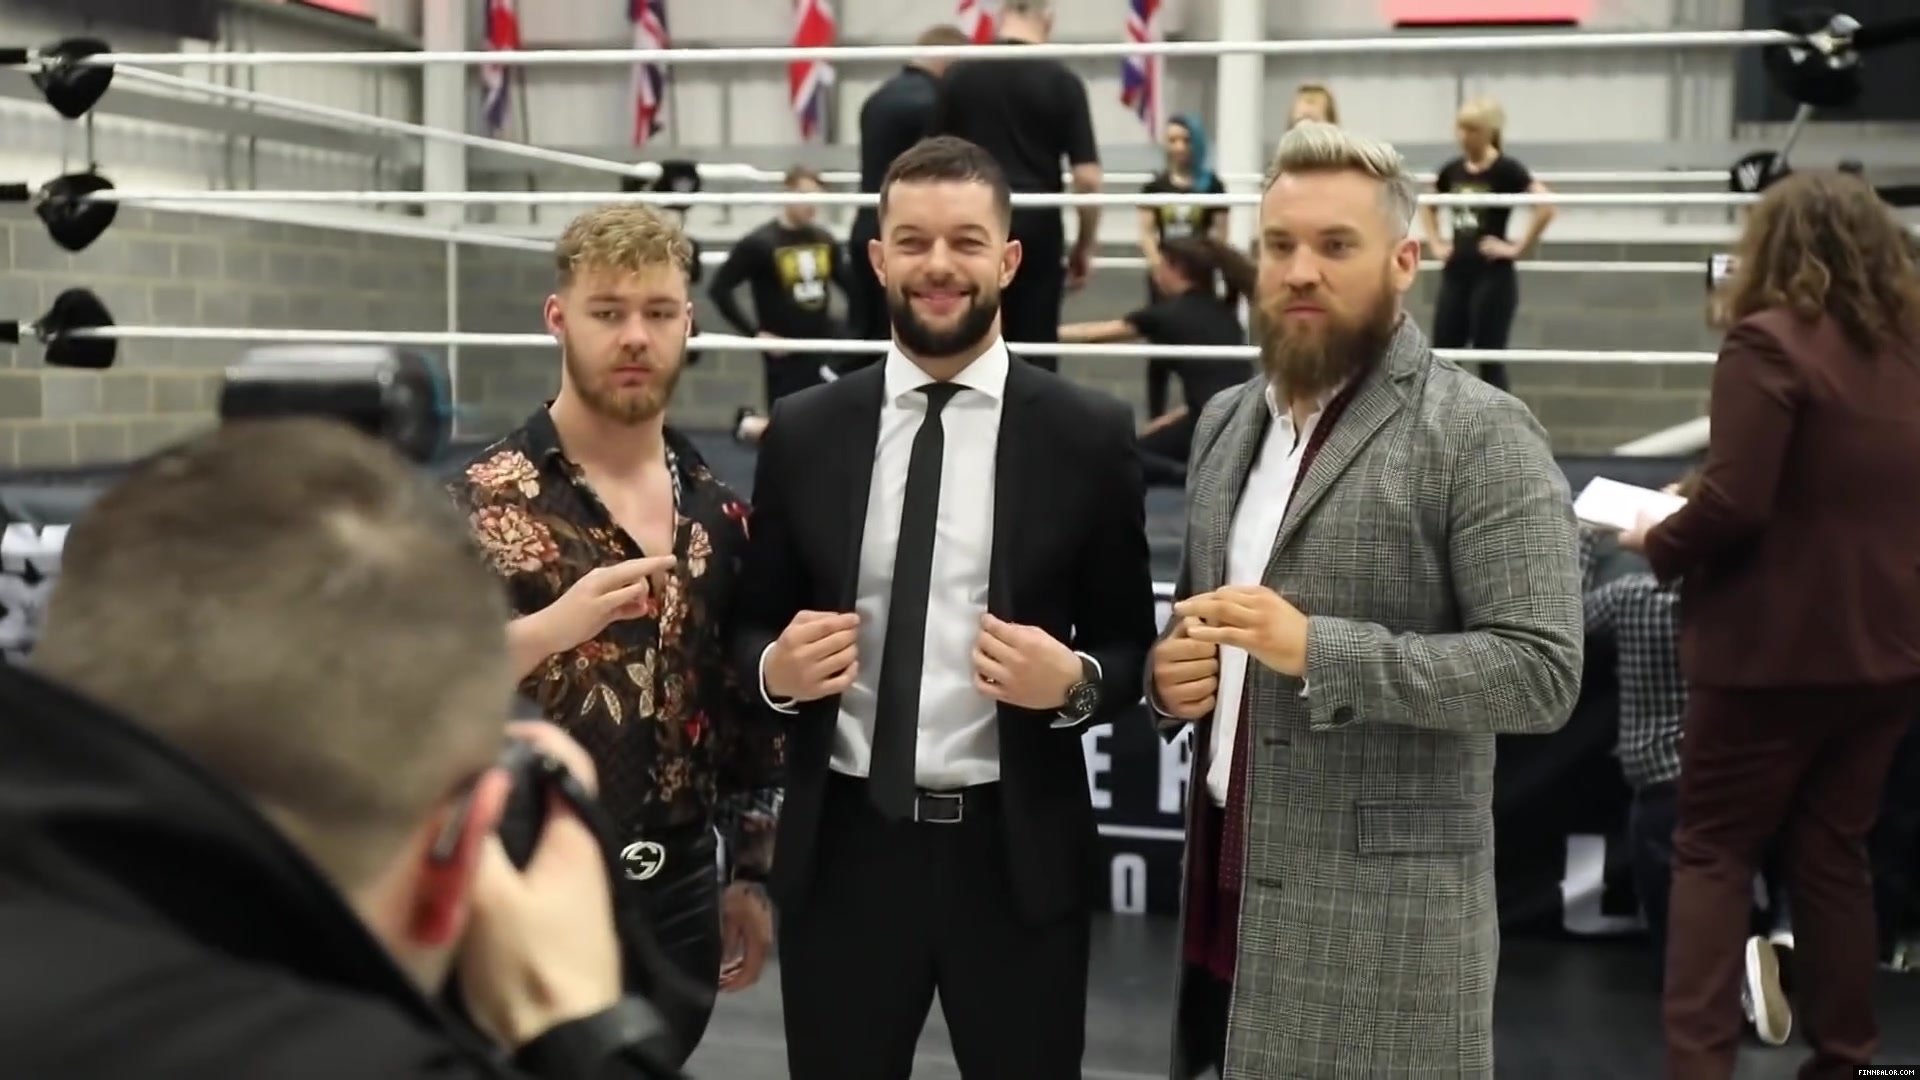 WWE_Superstar_FINN_BALOR_joins_MOUSTACHE_MOUNTAIN_at_the_opening_of_the_NXT_UK_PC_036.jpg